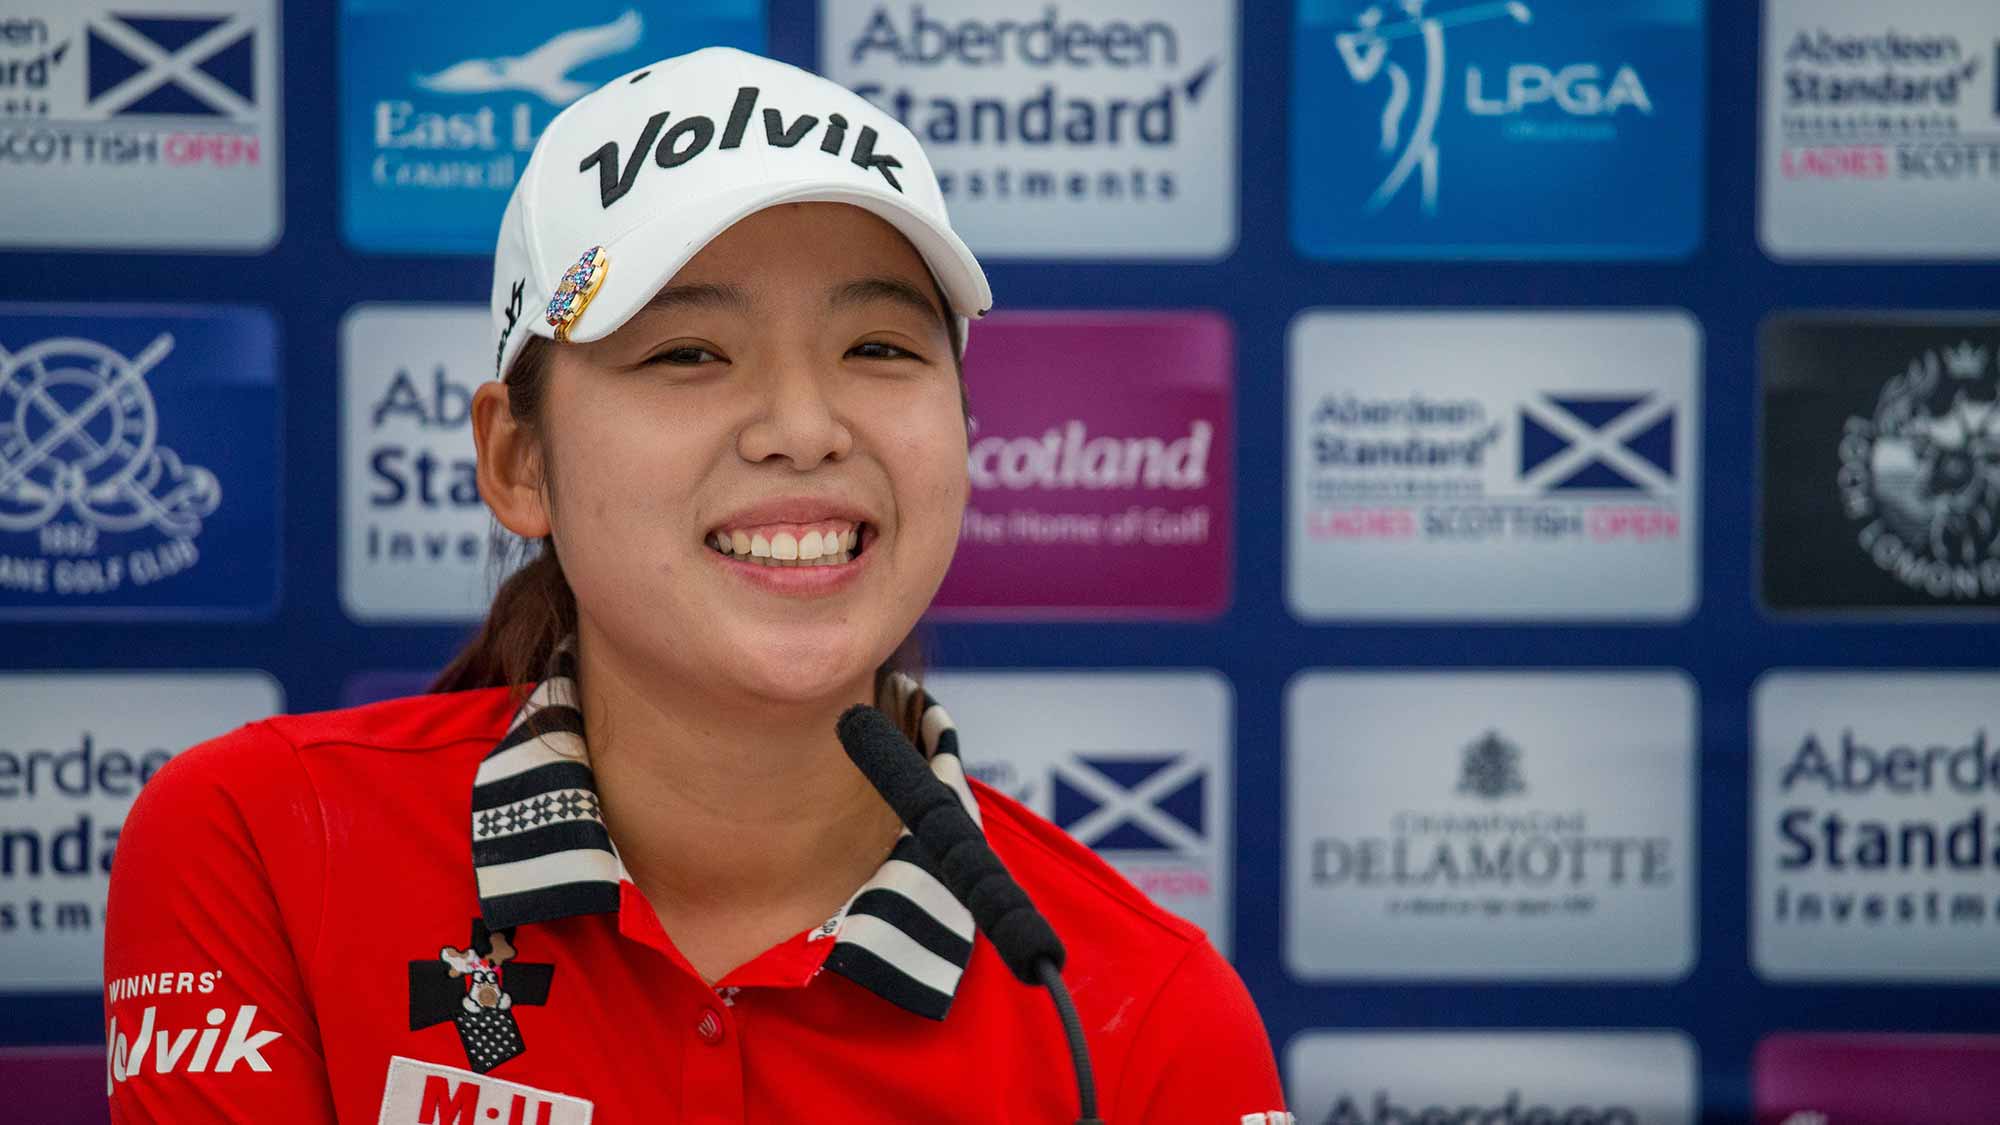 Mi Hyang Lee meets with the media ahead of her title defense at the Aberdeen Standard Investments Ladies Scottish Open at Gullane Golf Club.